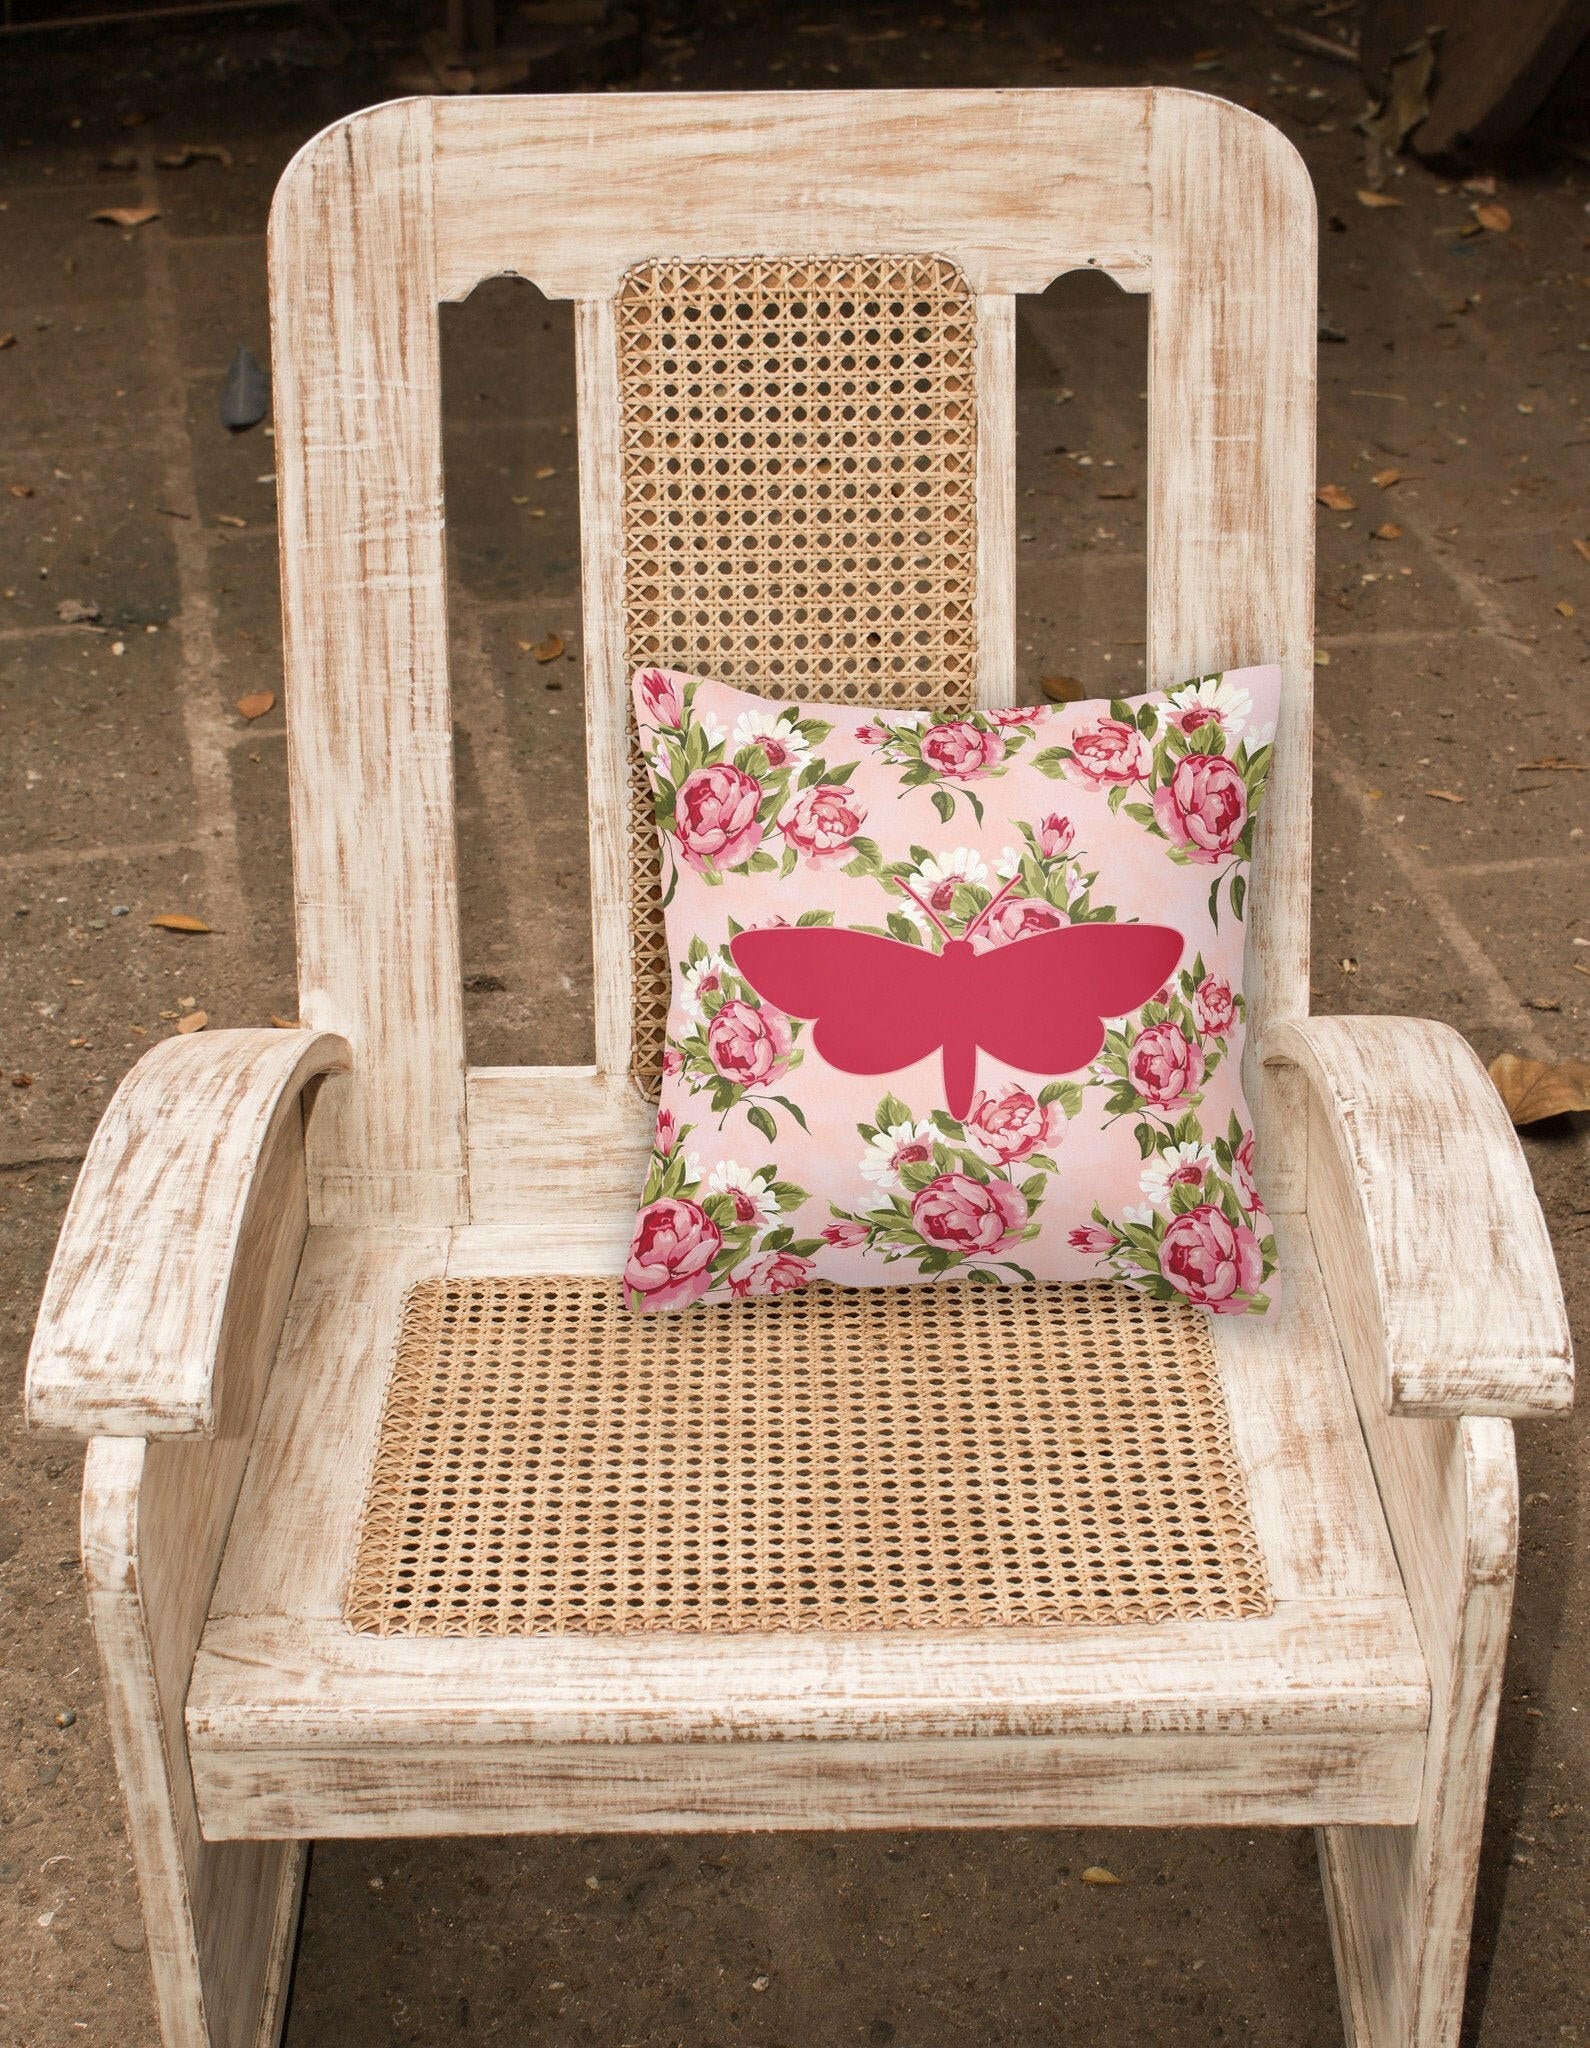 Moth Shabby Chic Pink Roses  Fabric Decorative Pillow BB1059-RS-PK-PW1414 - the-store.com